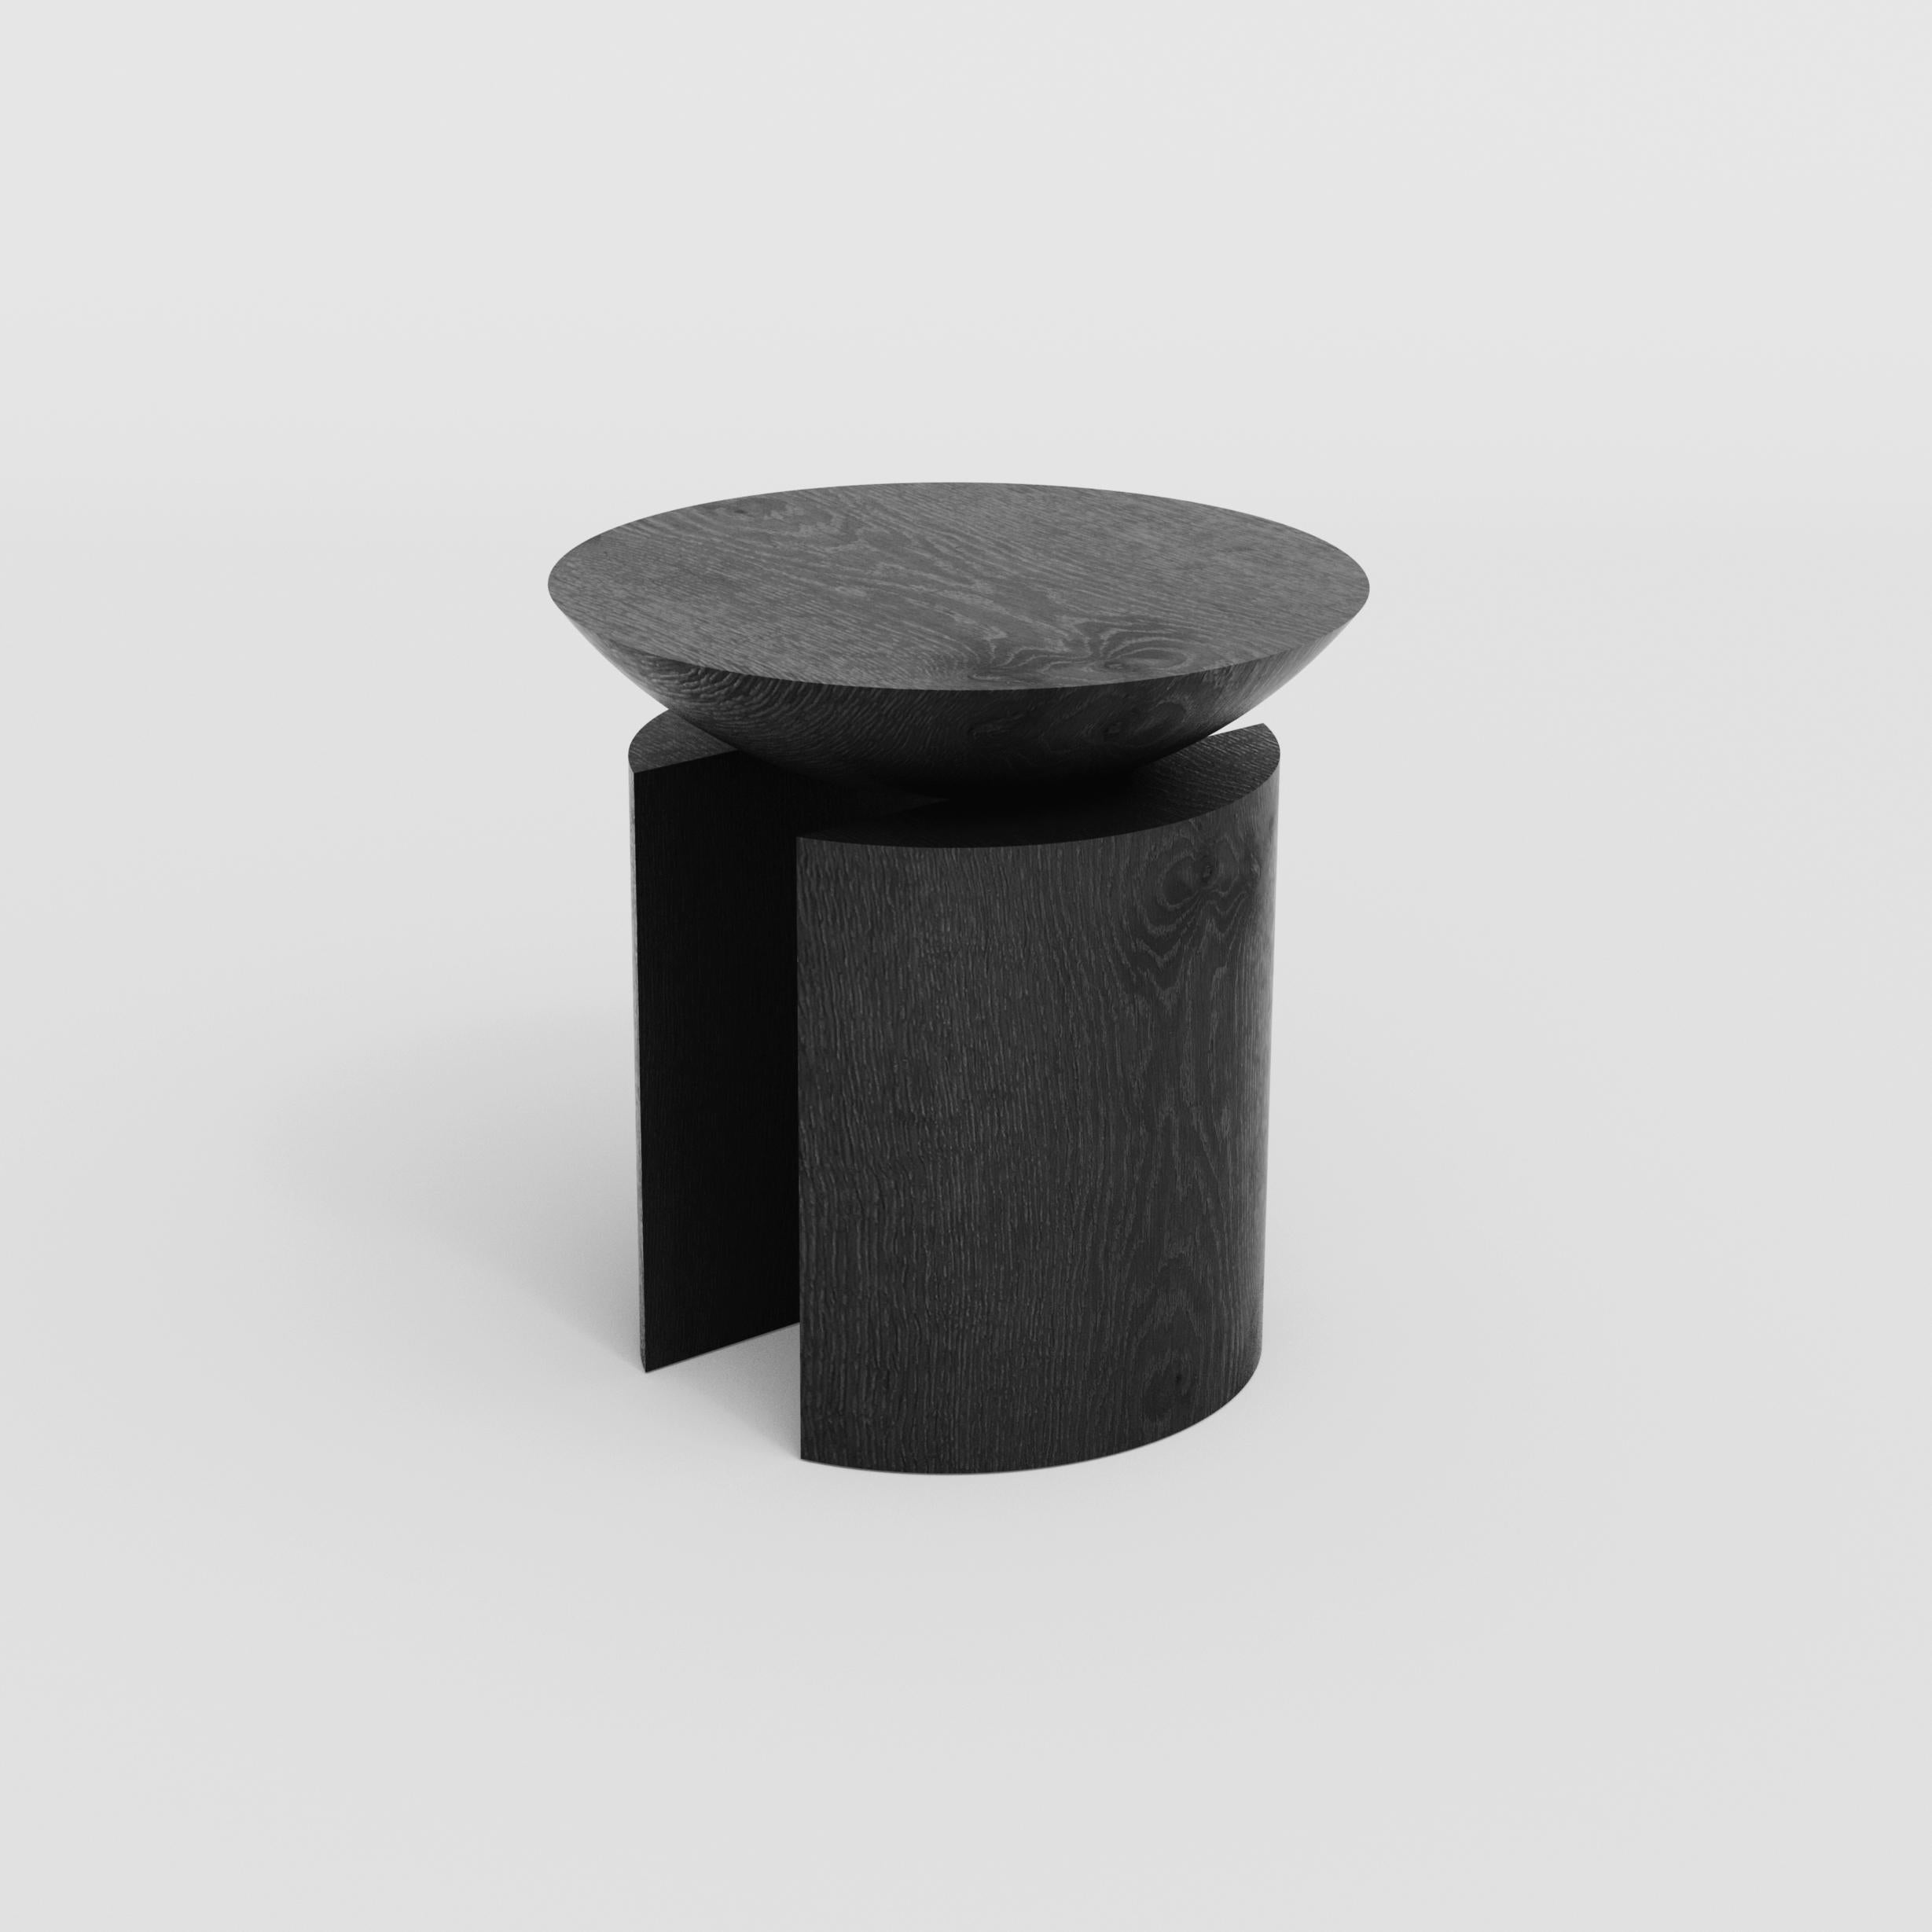 Brazilian Anca Alta Sculptural Side Table/Stool Tropical Hardwood by Pedro Paulo Venzon For Sale